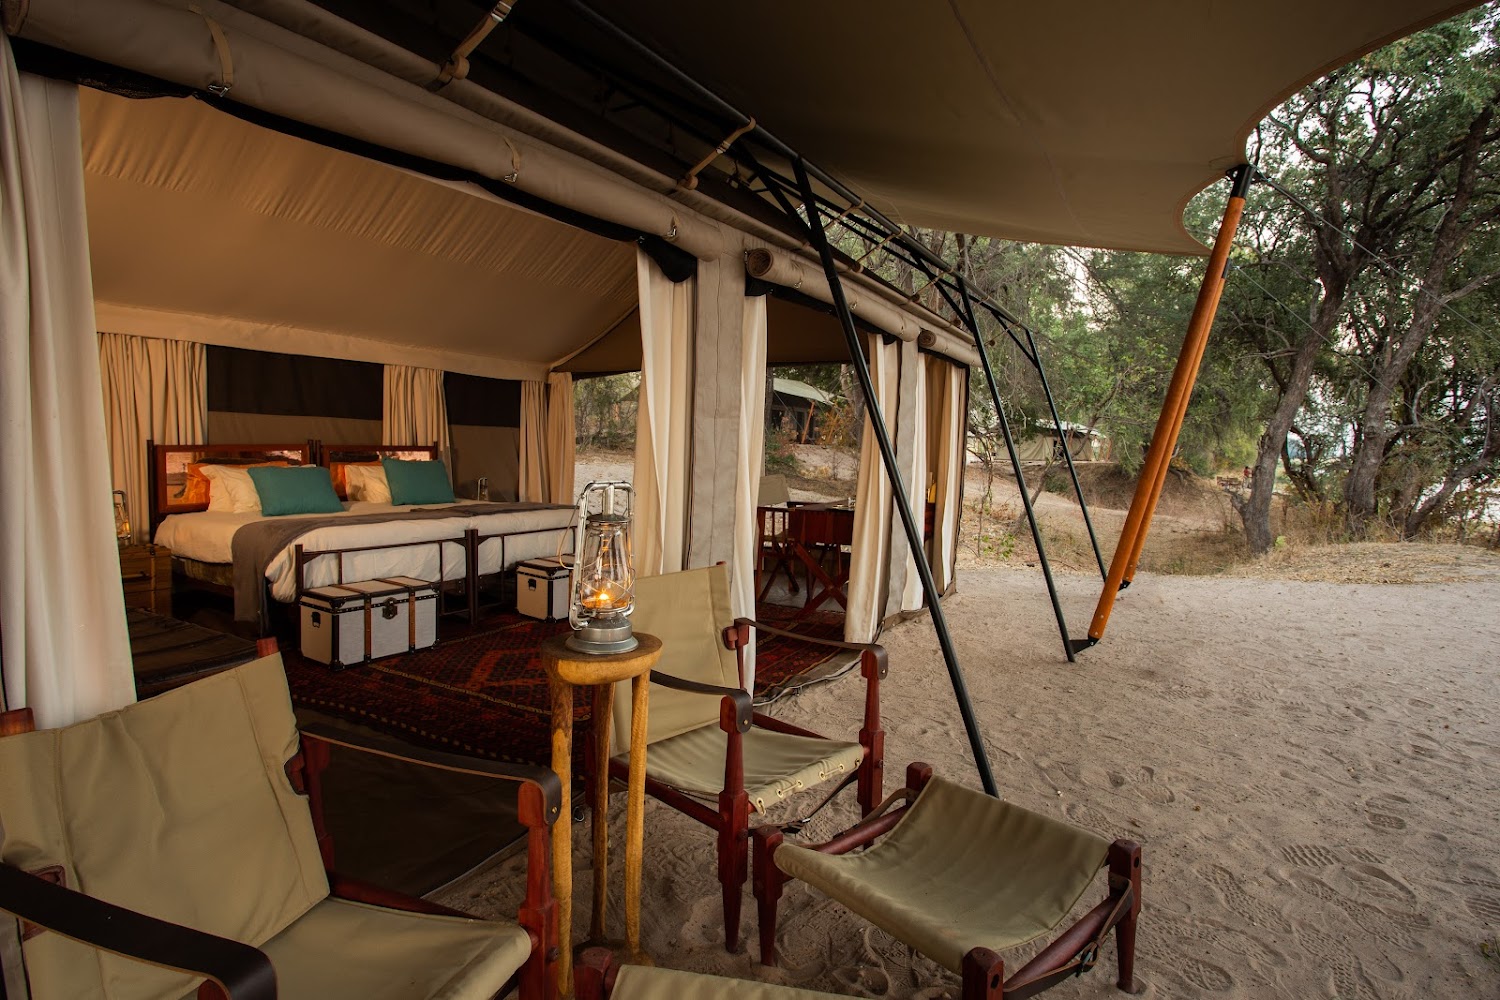 Great Plains has opened Okavango Explorers Camp in northern Botswana, a six-bed retreat located in the 160,000-hectare private Selinda Reserve.